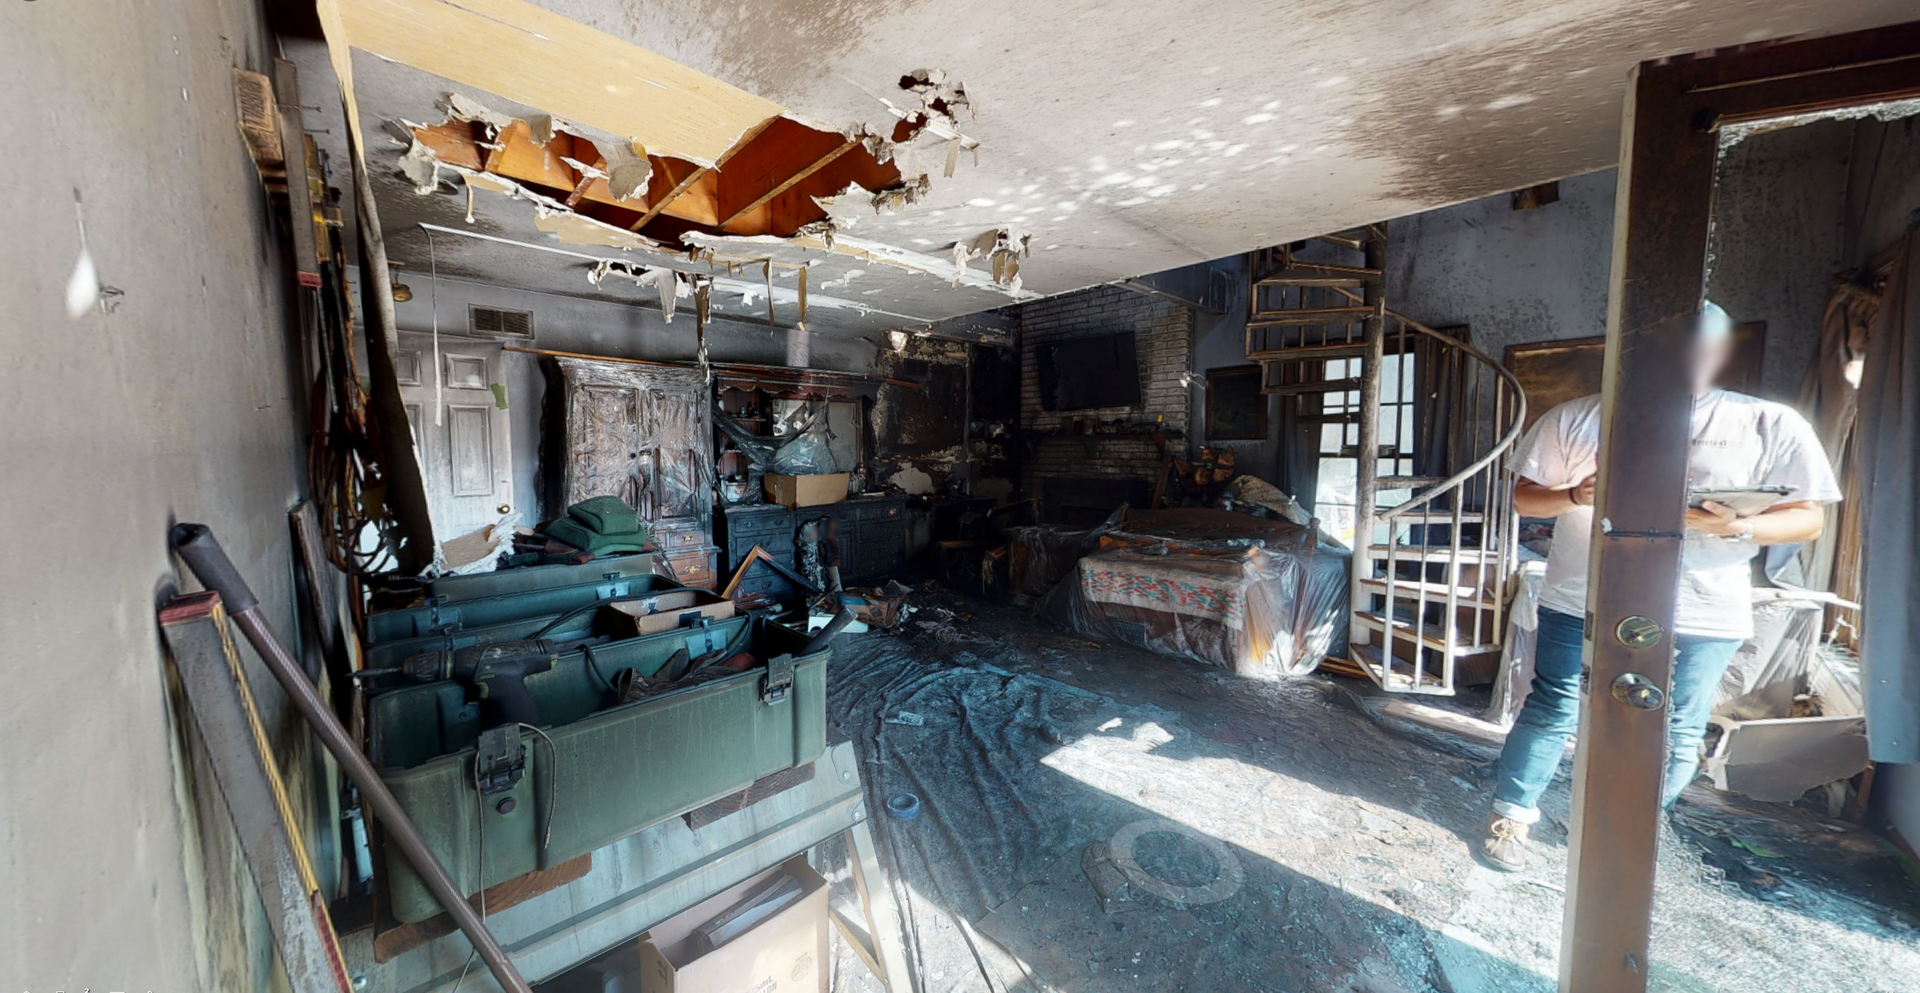 Fire Damage to Main Room